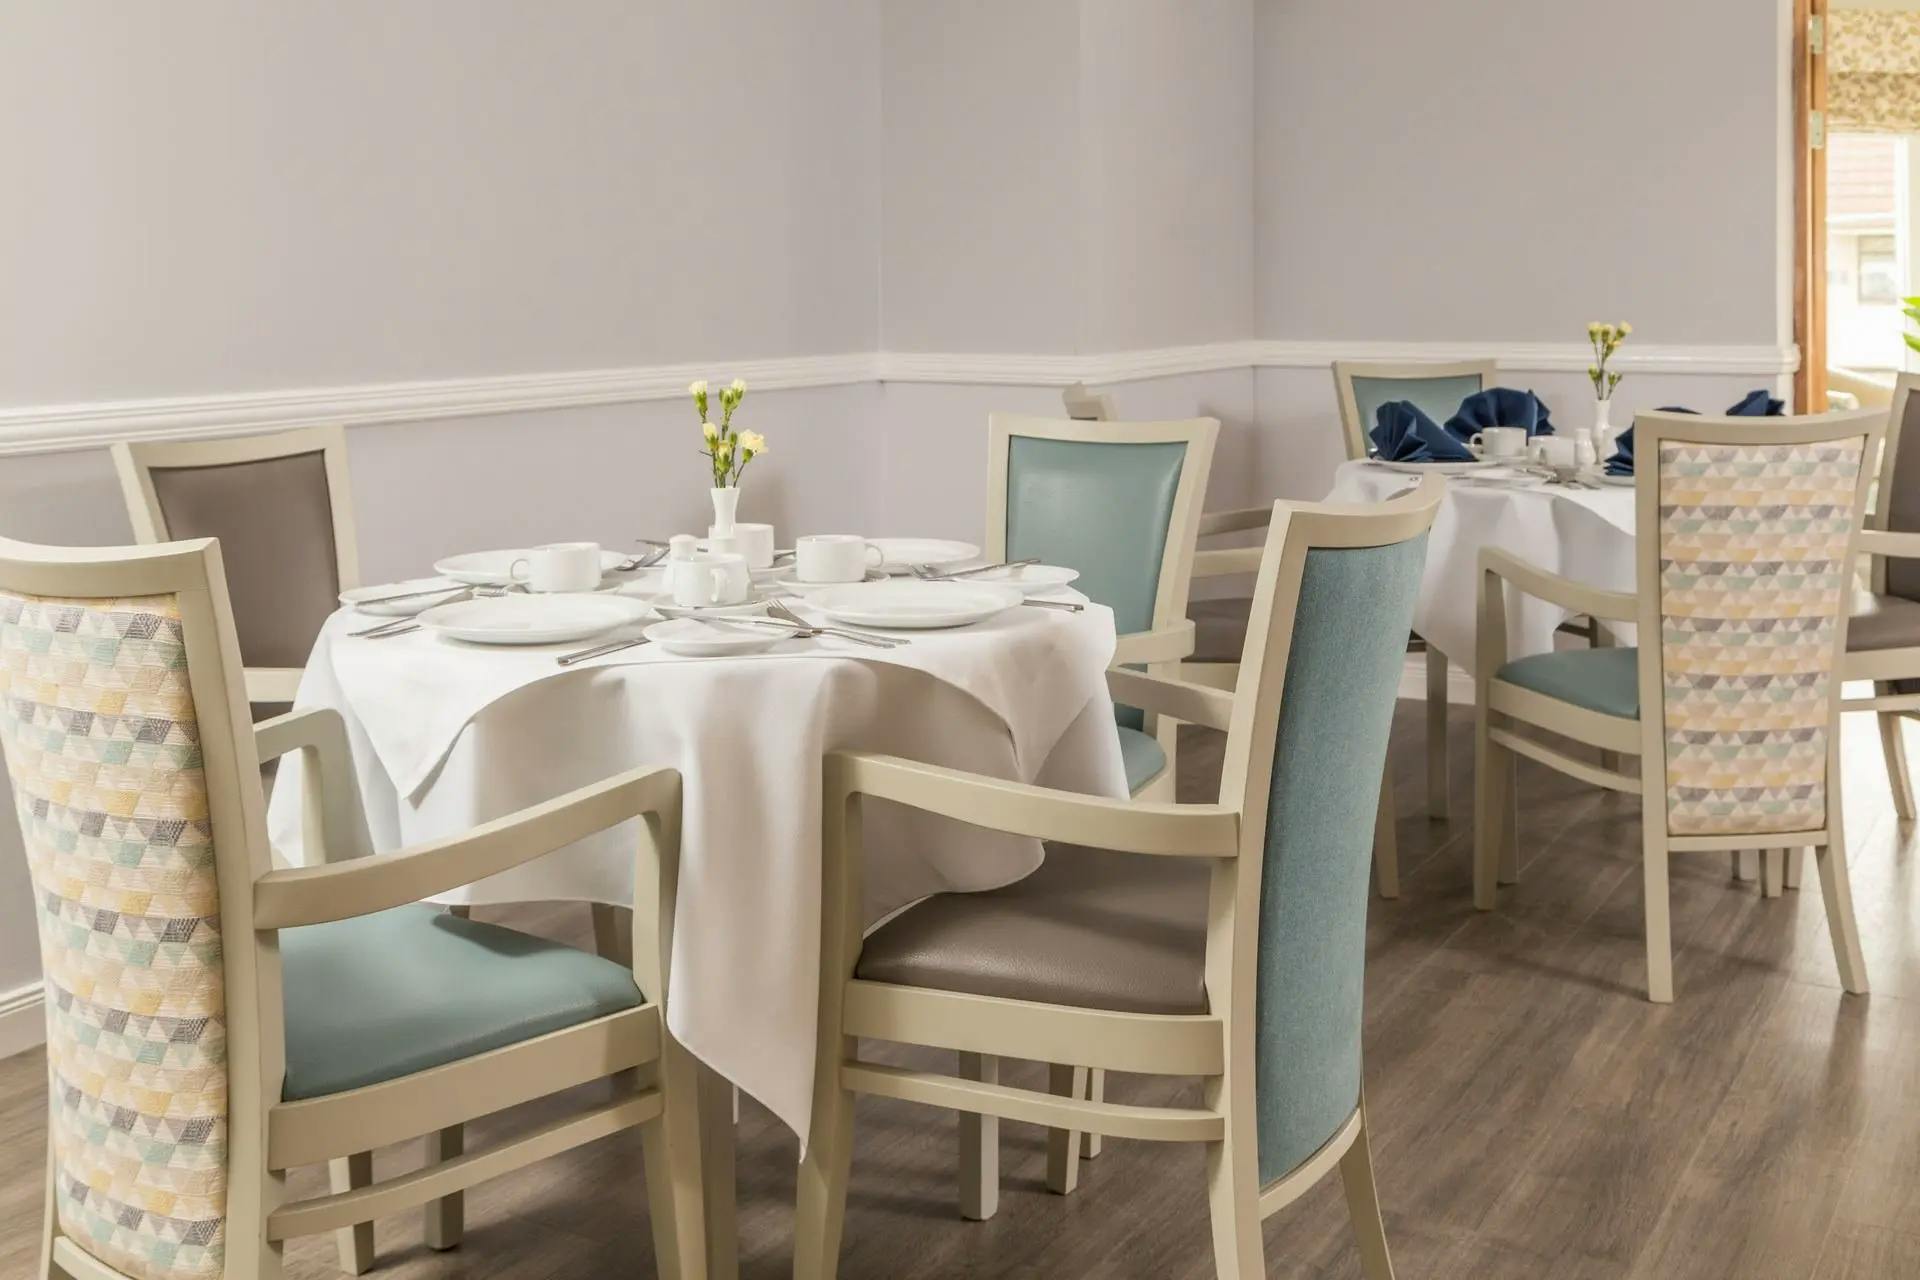 Dining Room at Forth Bay Care Home in Alloa, Fife